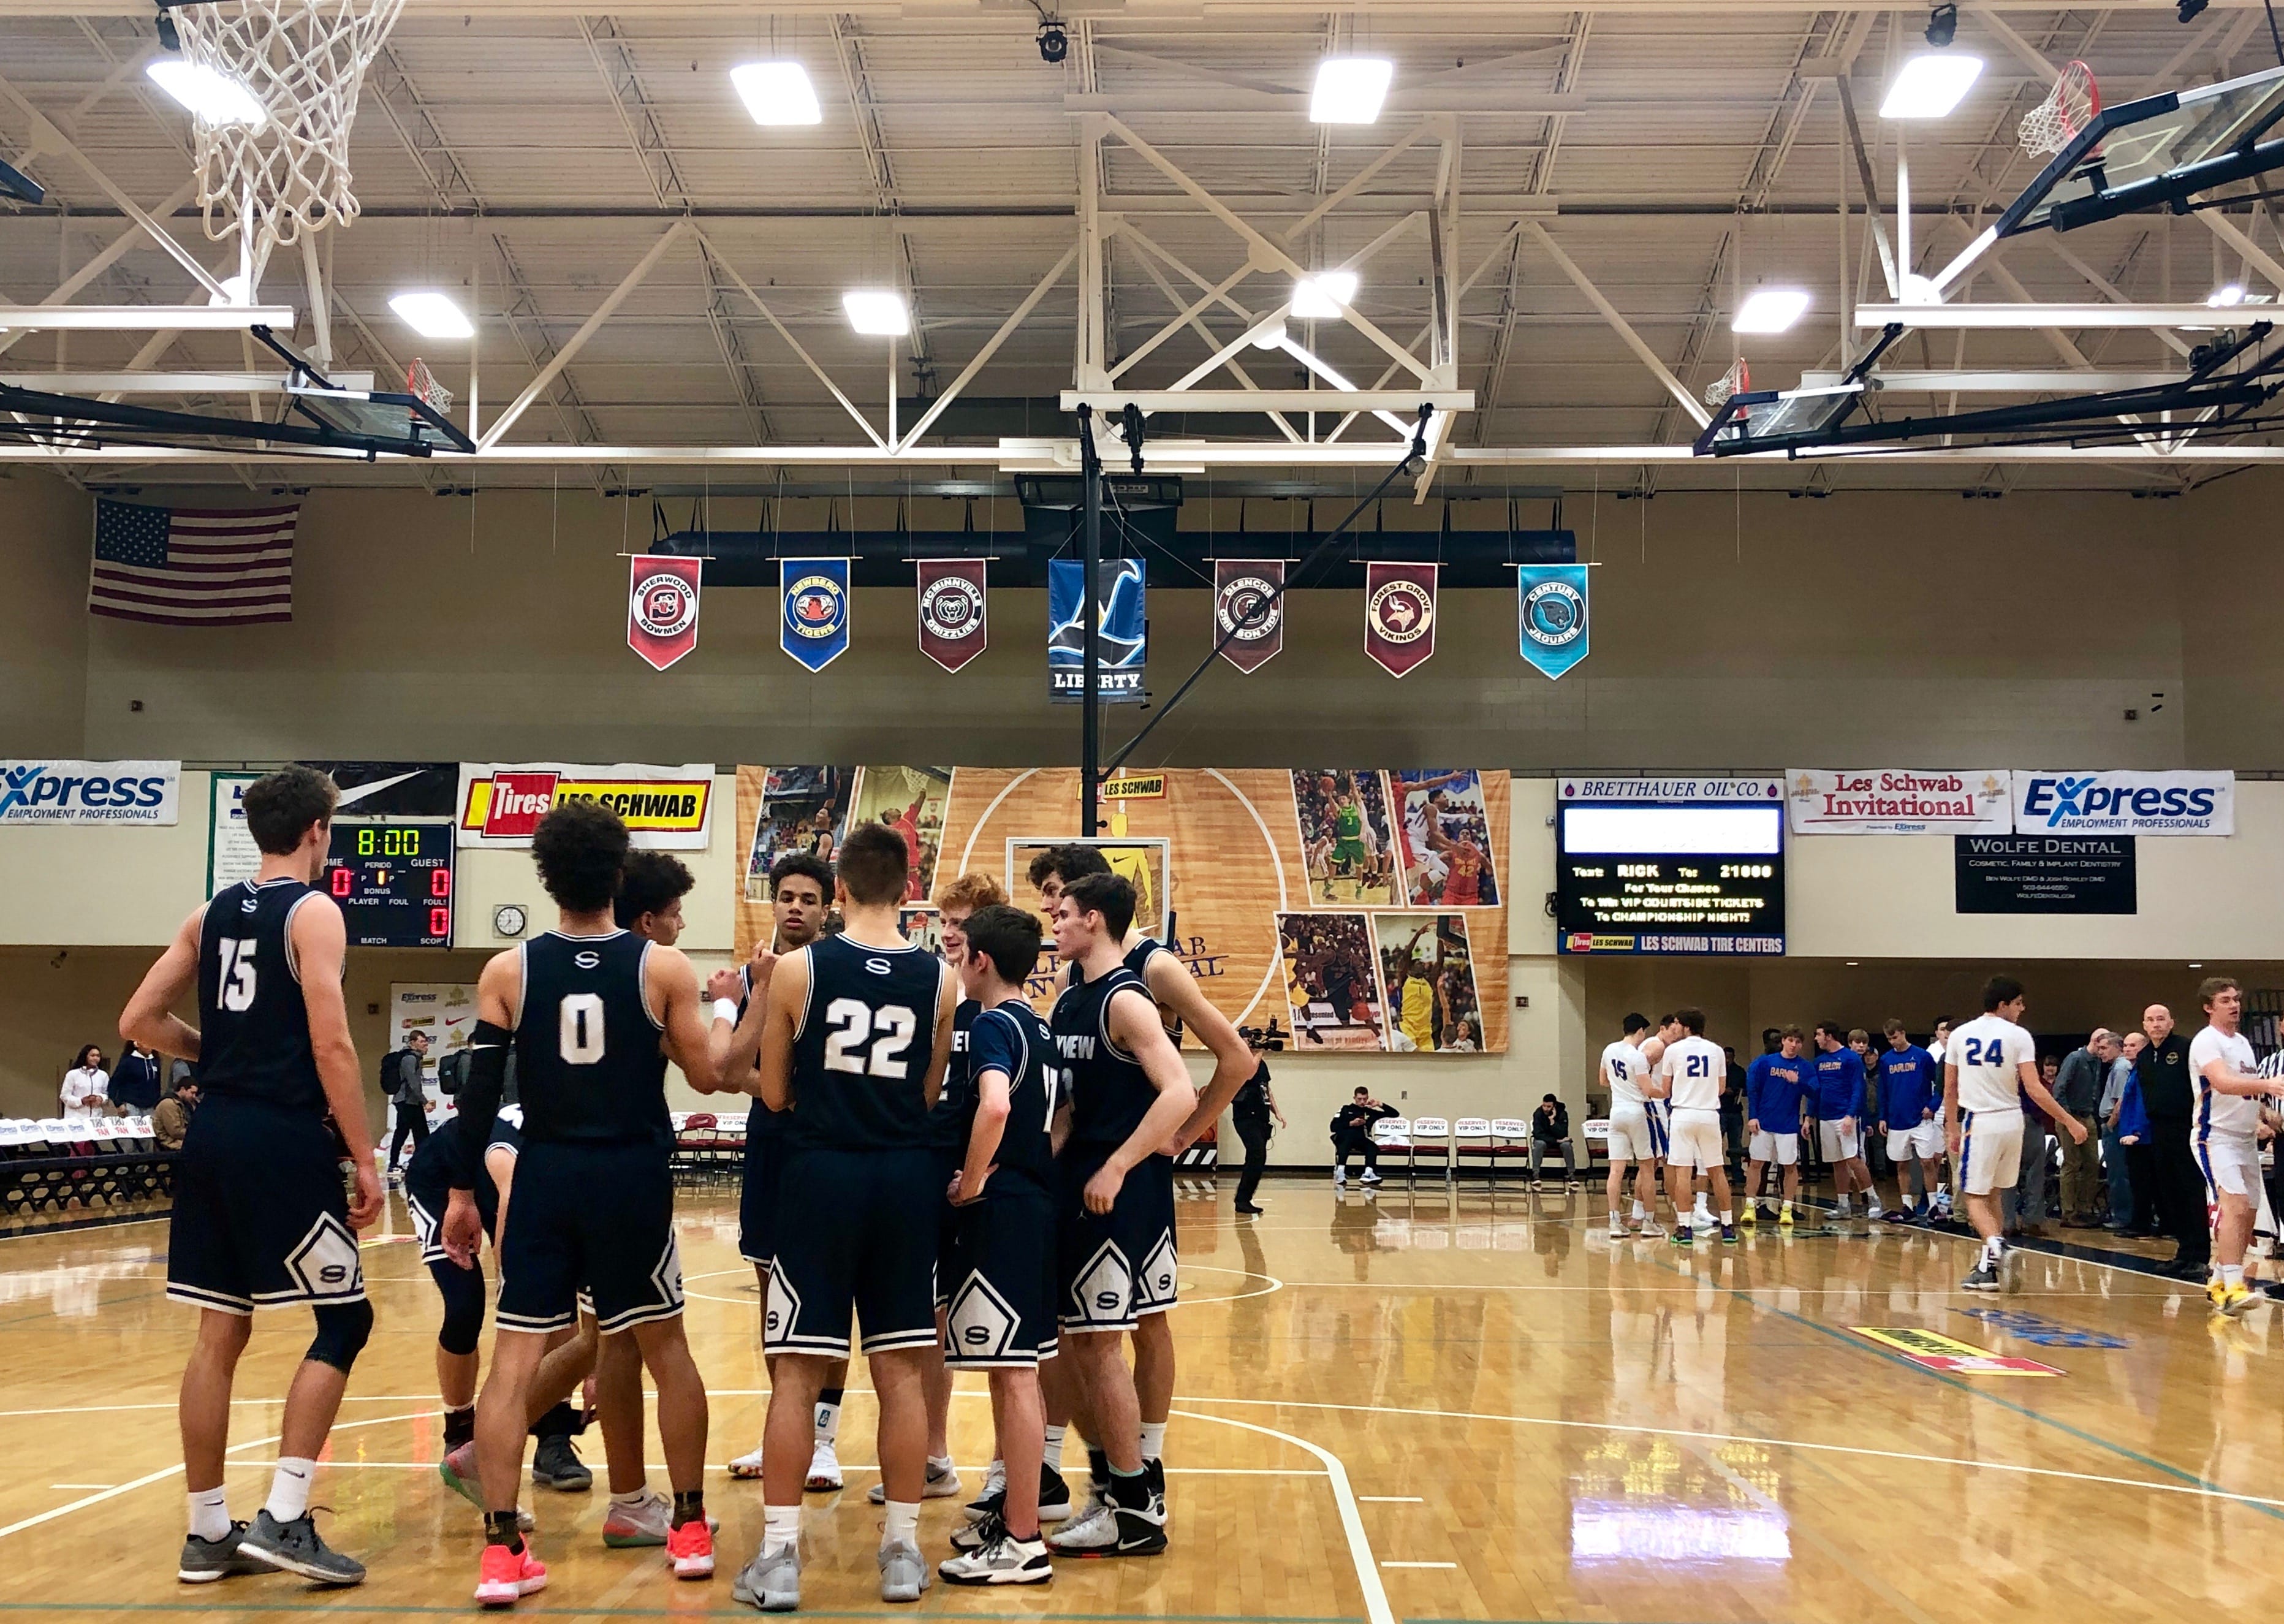 Skyview huddles before taking the court against Barlow (Ore.), a game it won 60-55 on the third day of the Les Schwab Invitational.